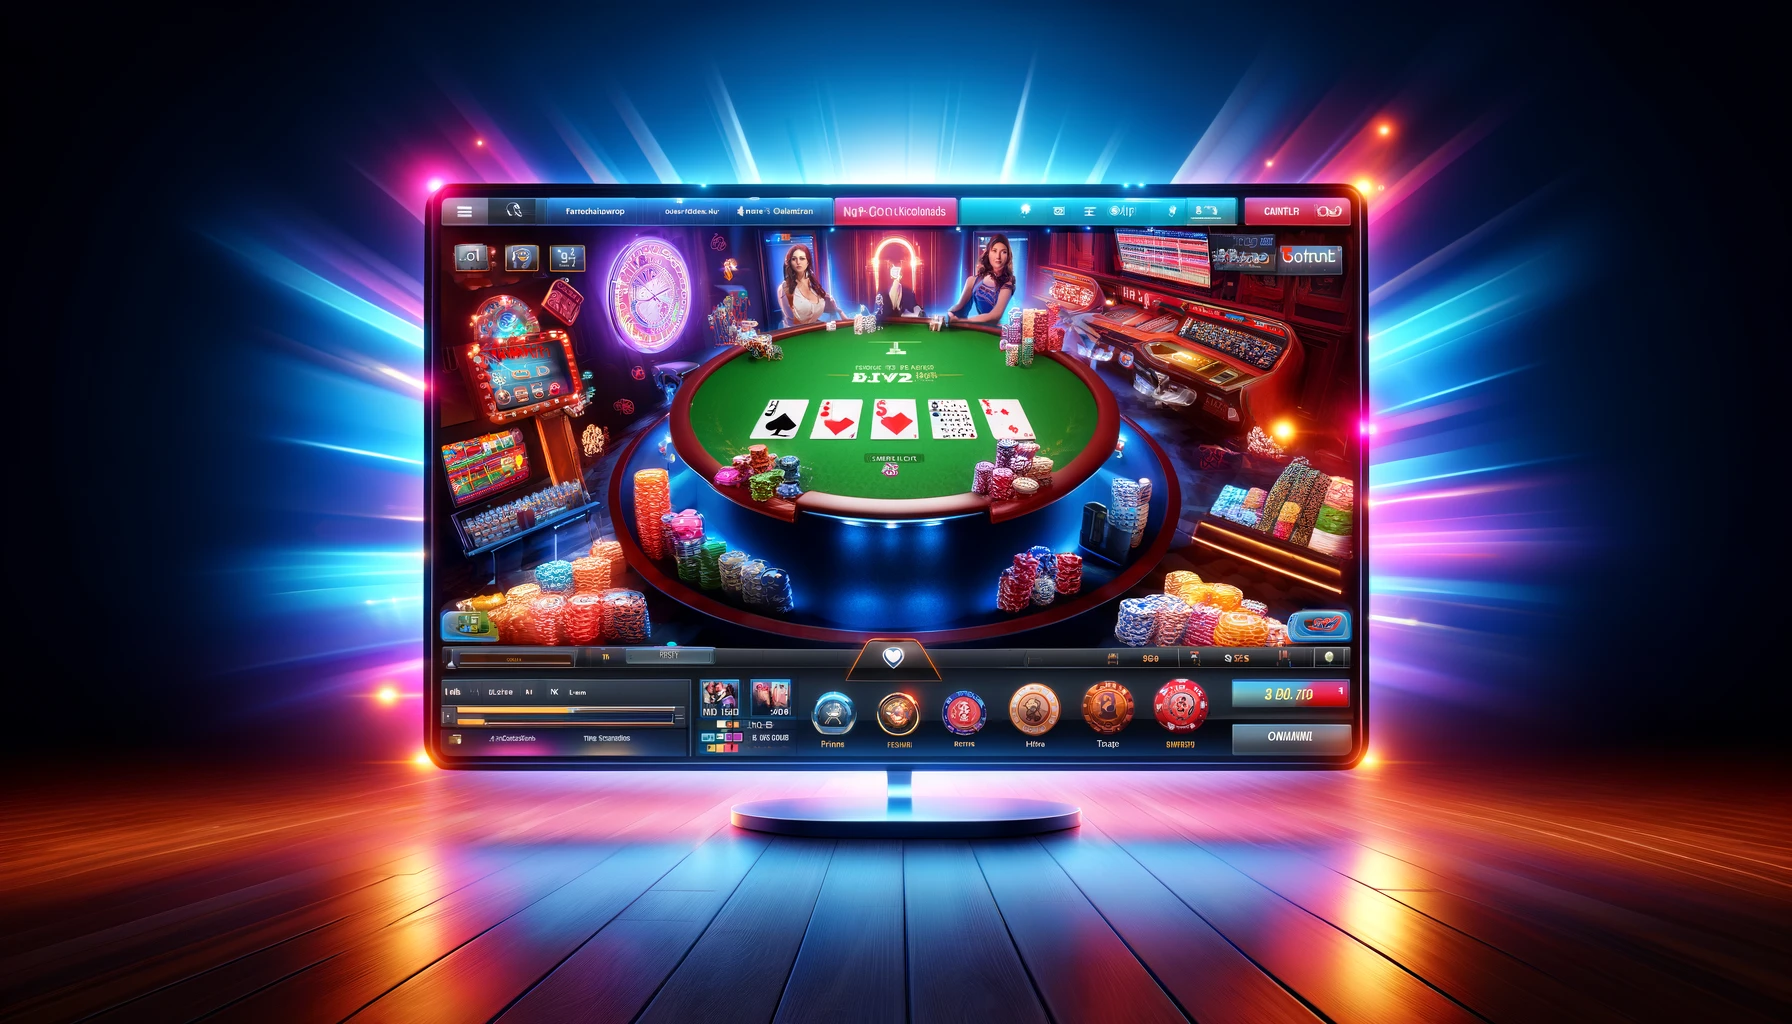 An online poker interface showcasing a poker table with cards, chips, and player avatars, highlighting popular games like Texas Hold'em and Omaha.